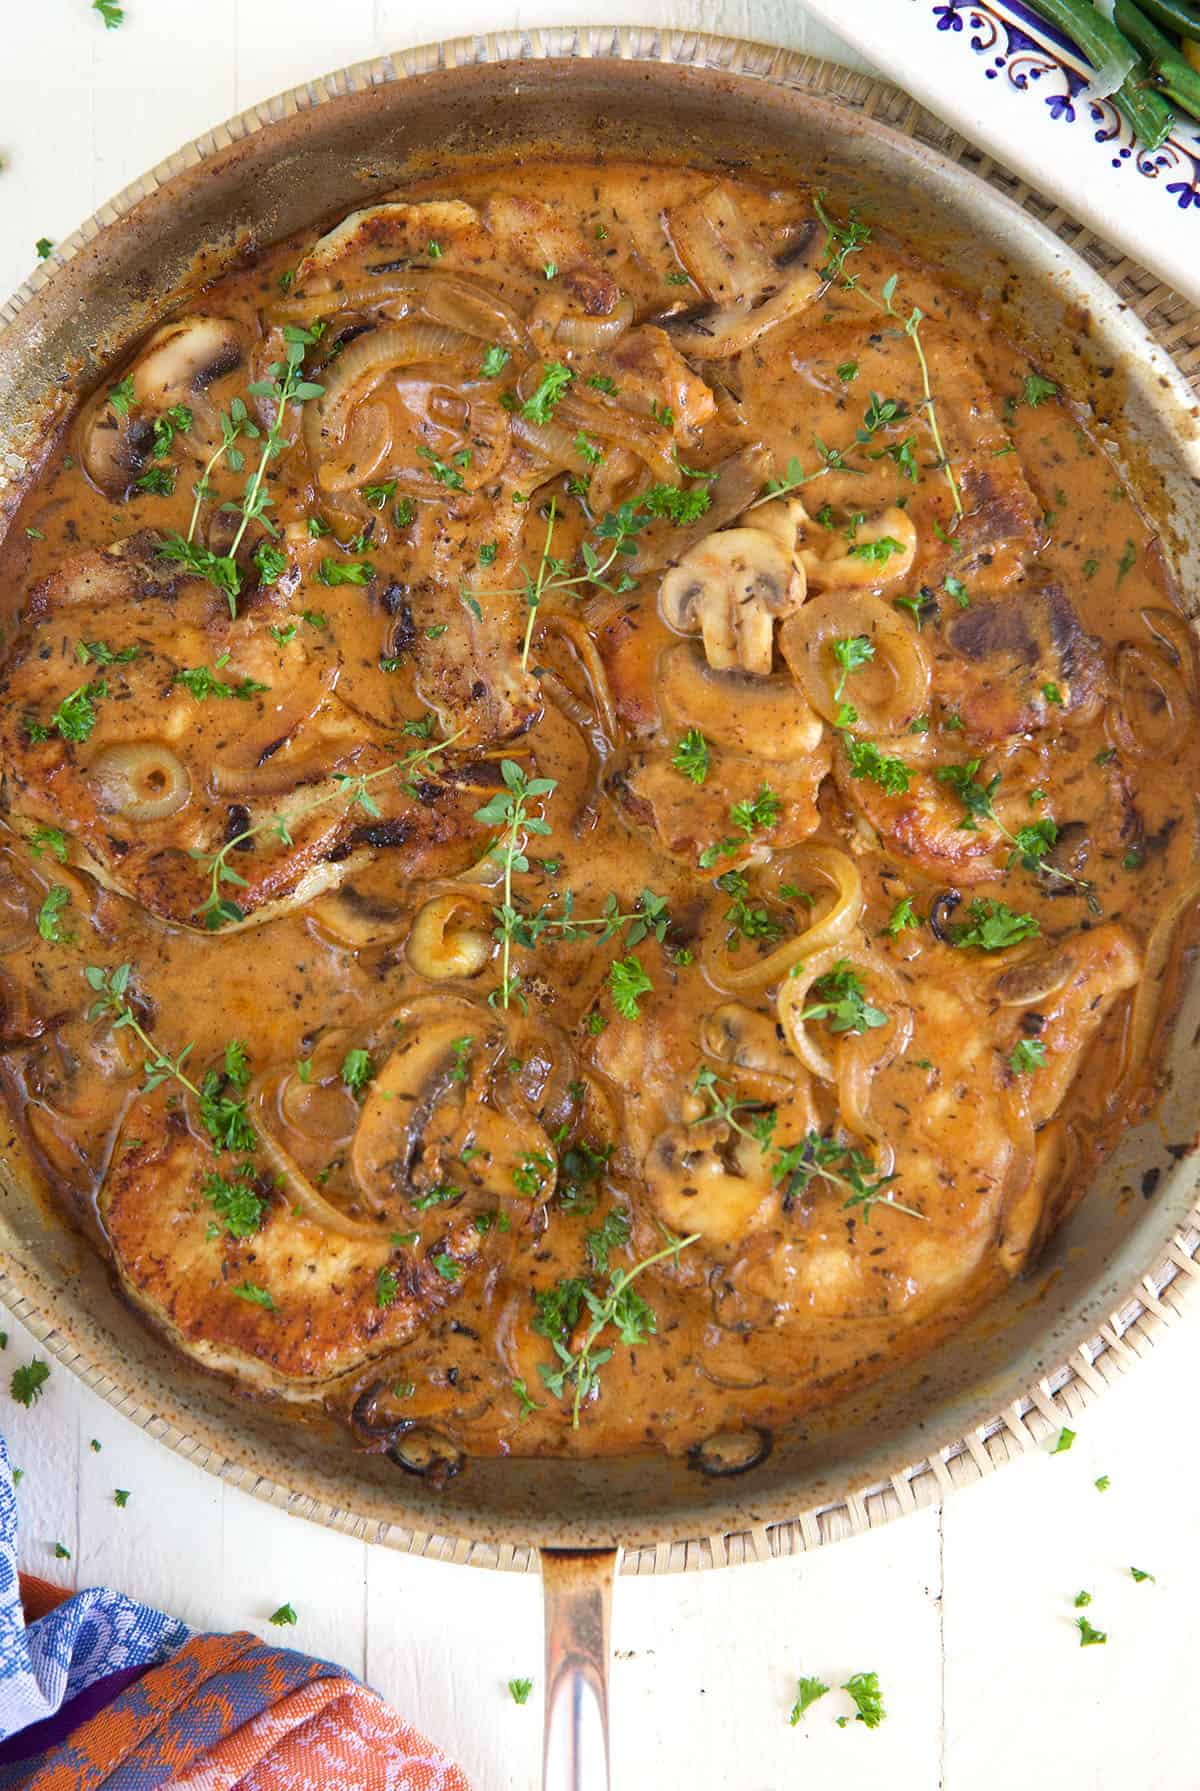 A skillet is filled with pork chops in brown gravy.